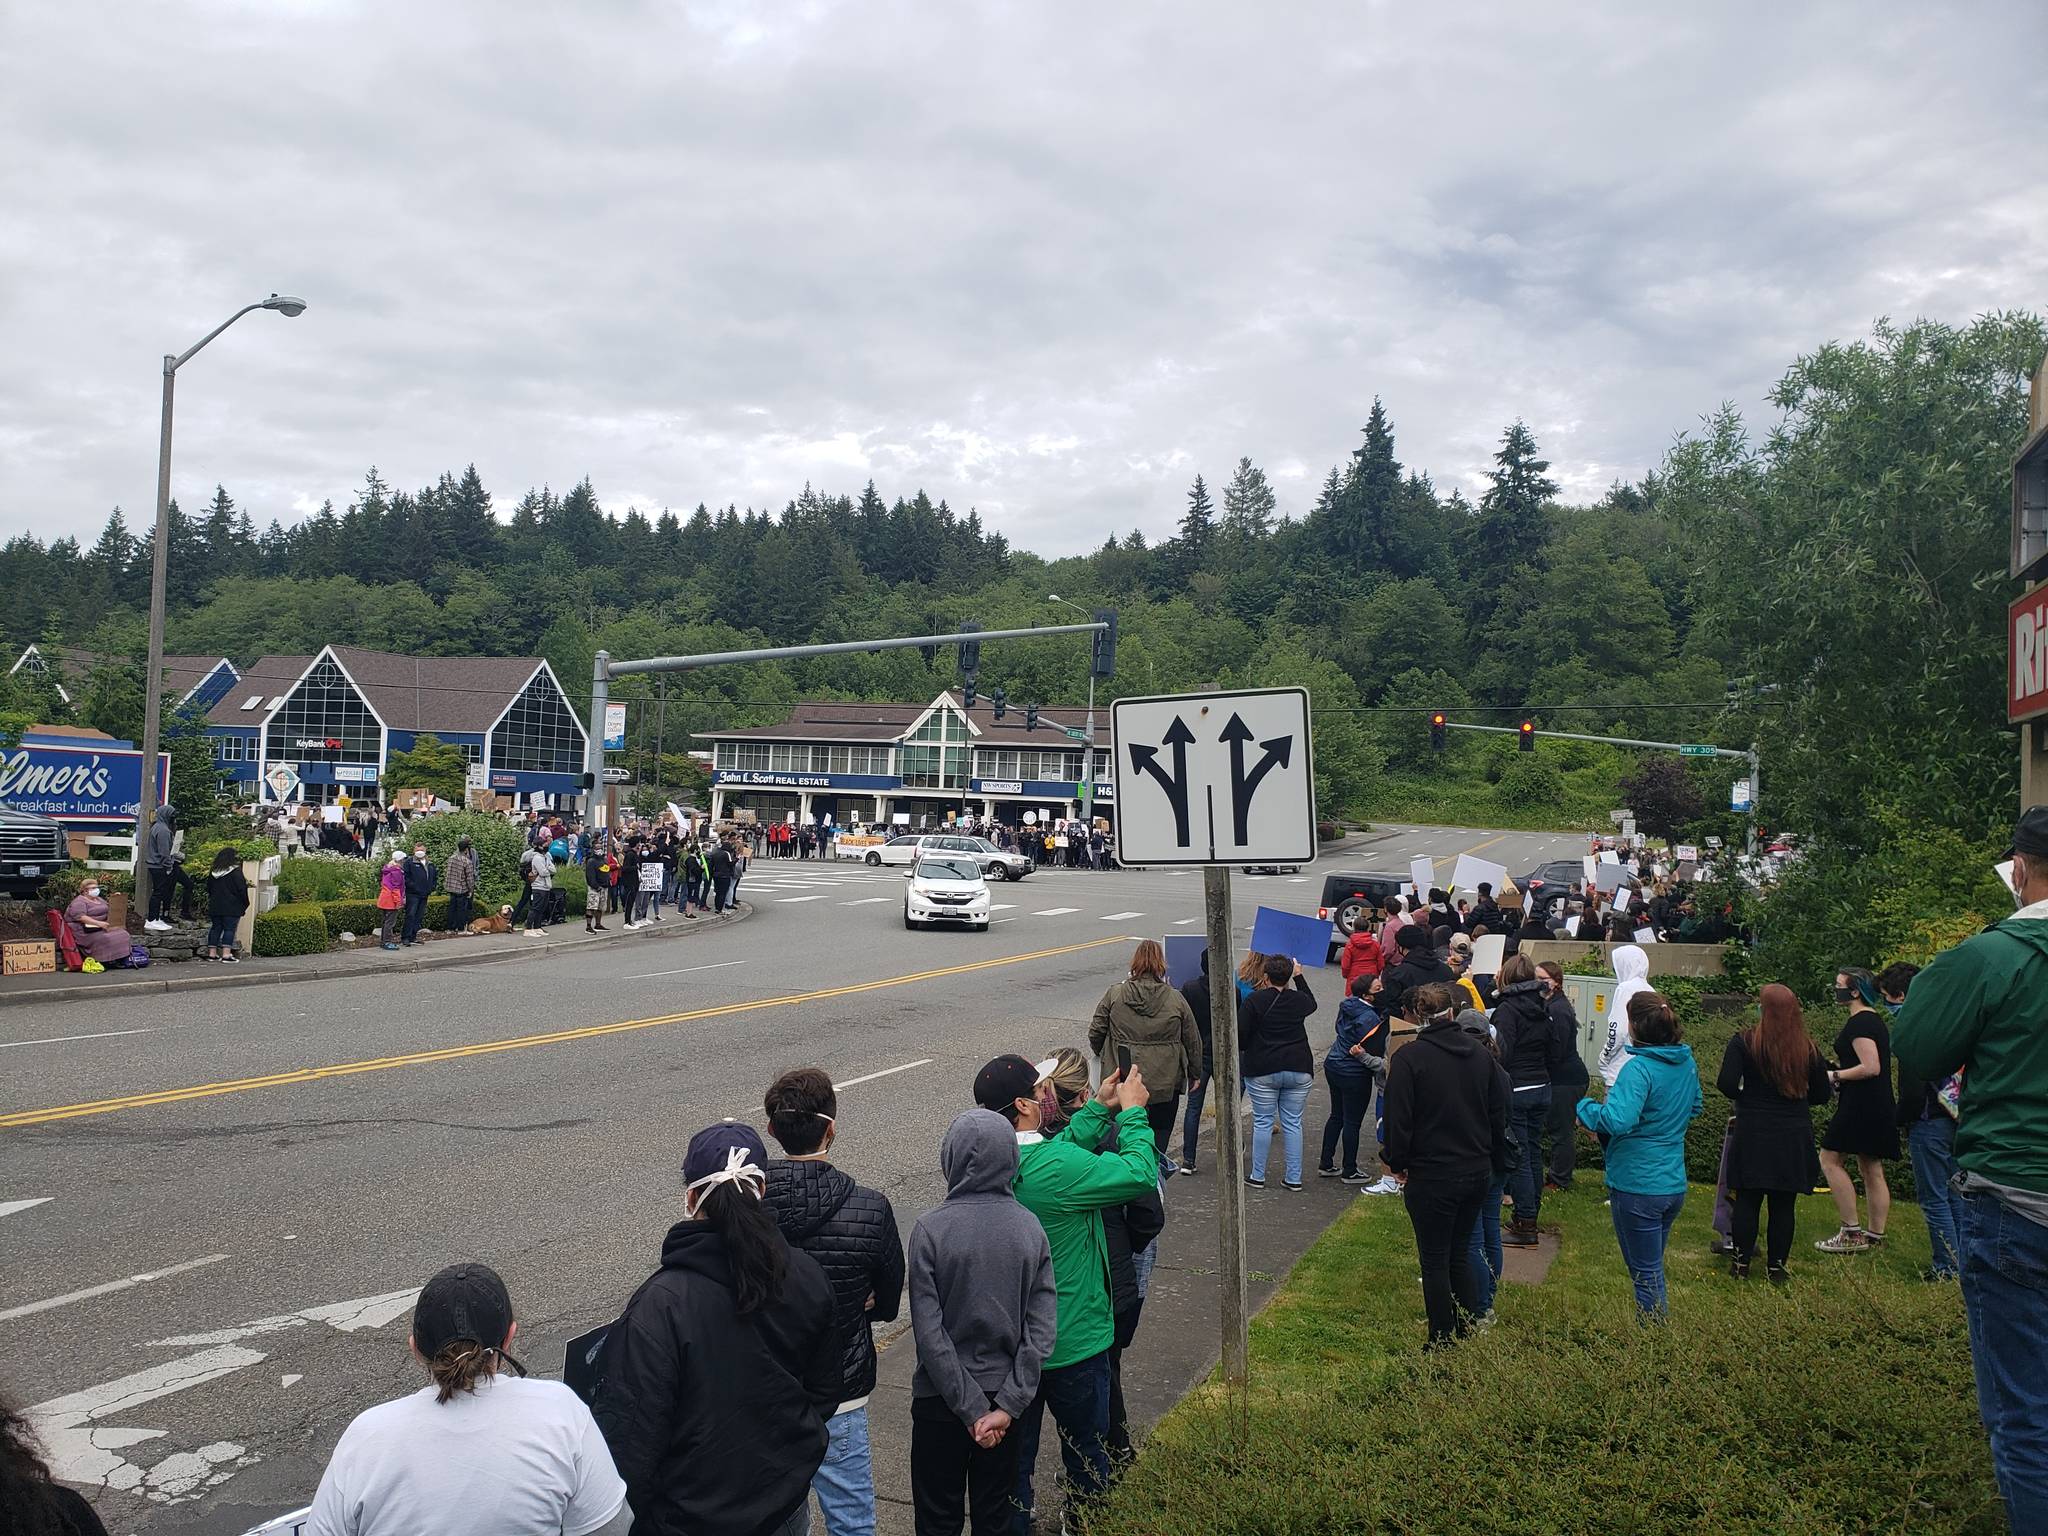 Demonstrators call for racial justice at Poulsbo protest